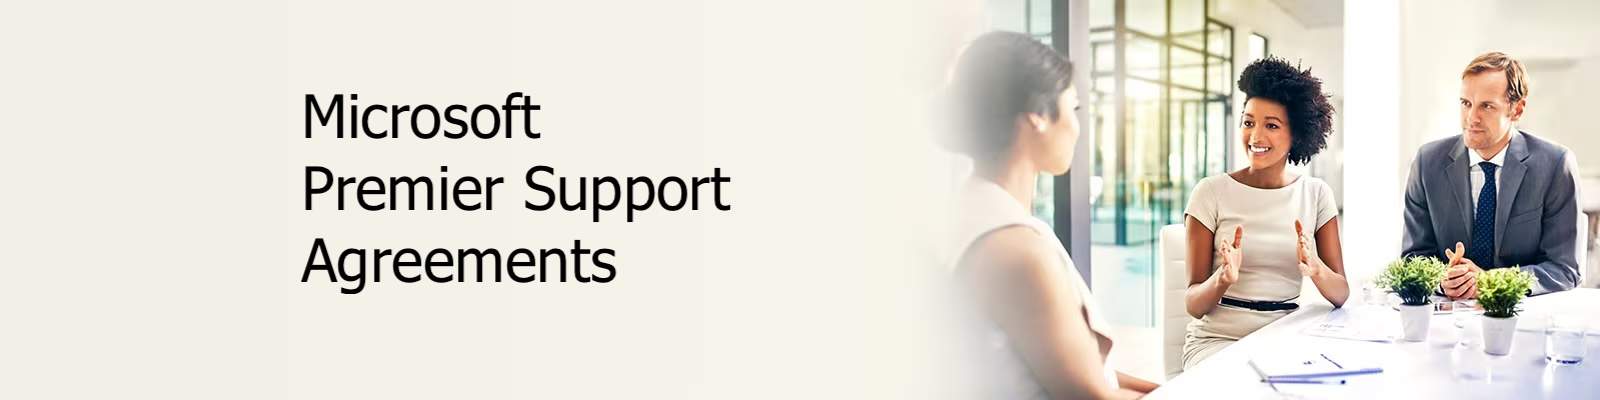 Microsoft Premier Support agreements